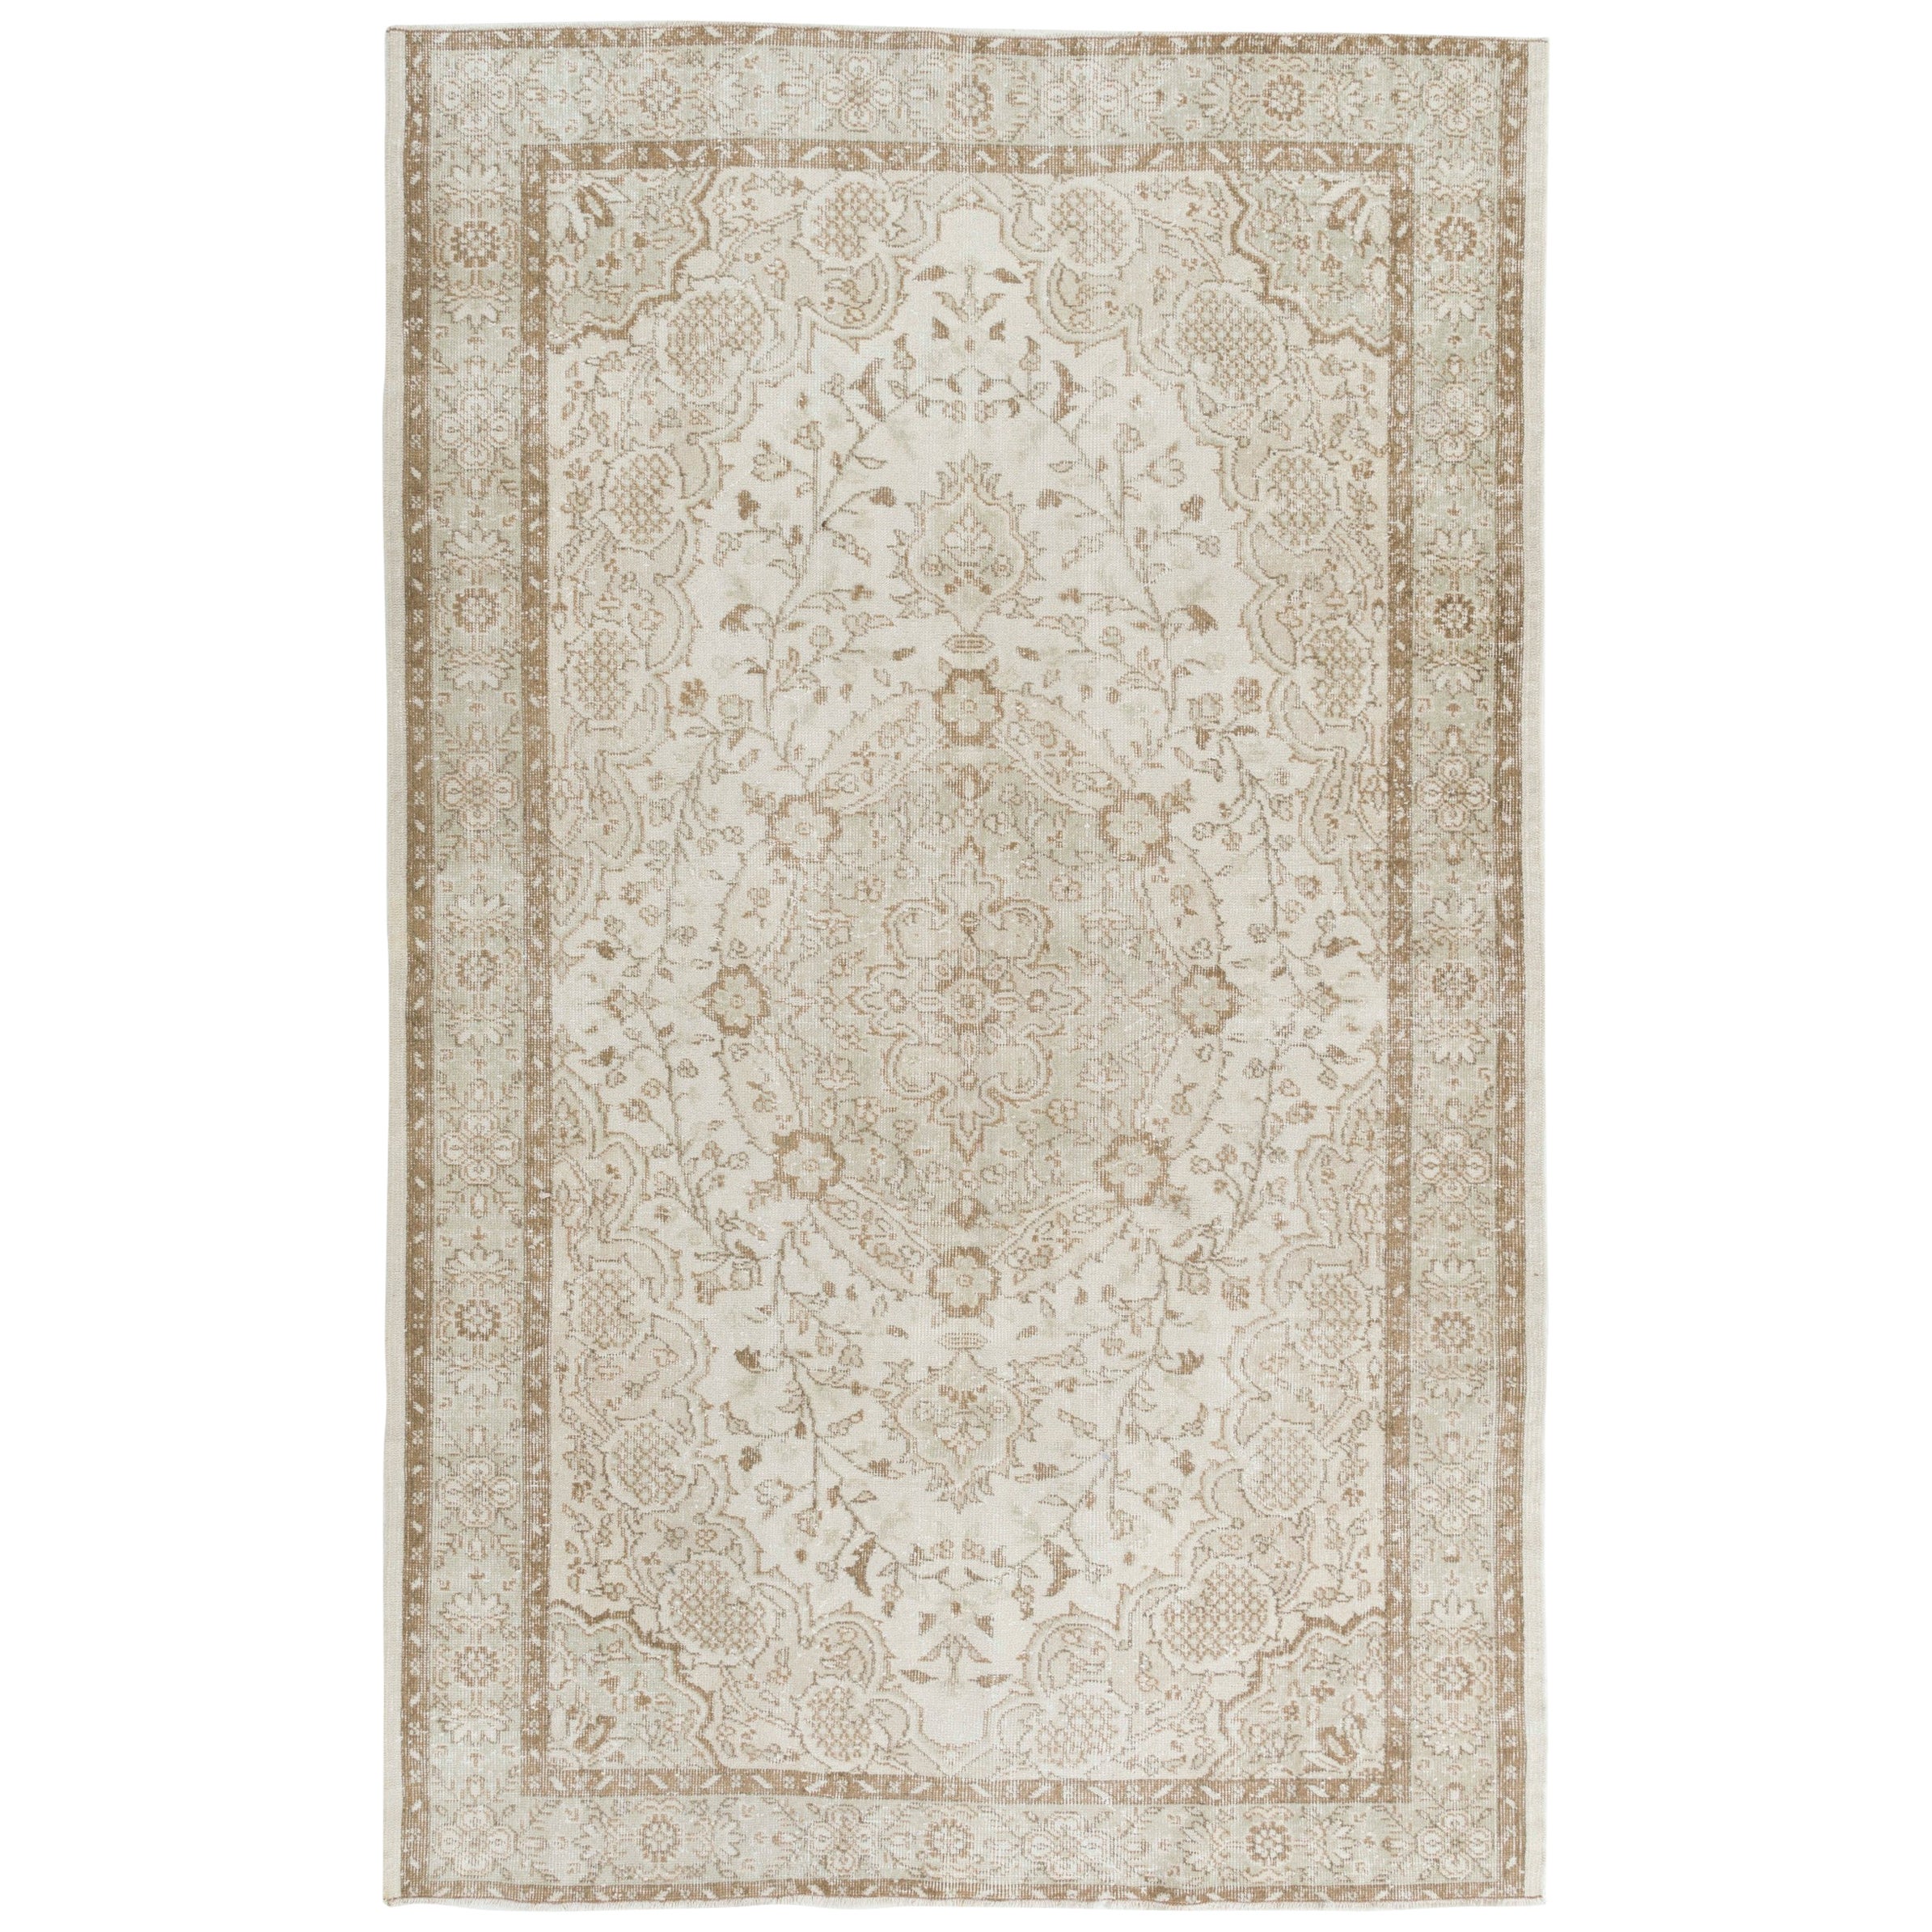 6.2x9.7 Ft Vintage Hand-Knotted Turkish Oushak Wool Area Rug in Neutral Colors